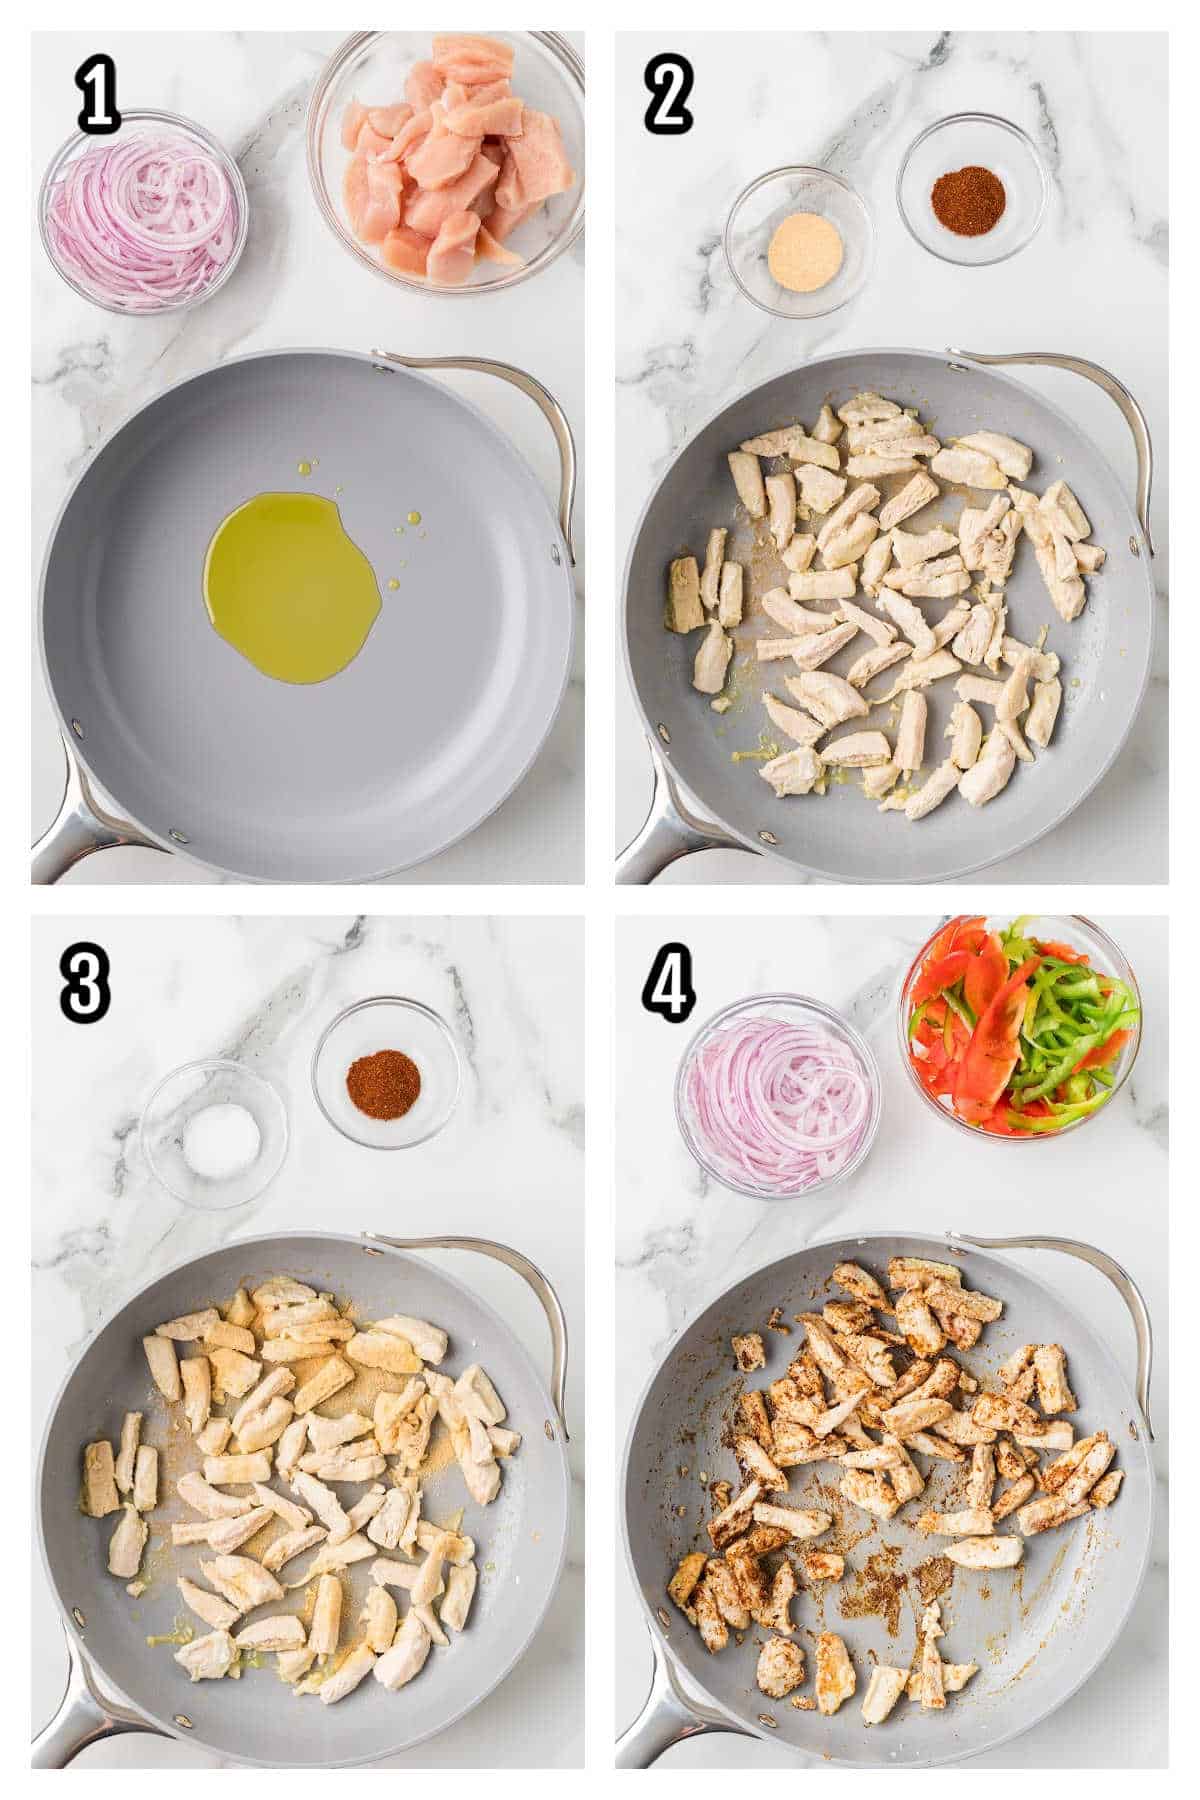 The first collage follows steps one through four of the Chicken Fajita Pizza recipe 